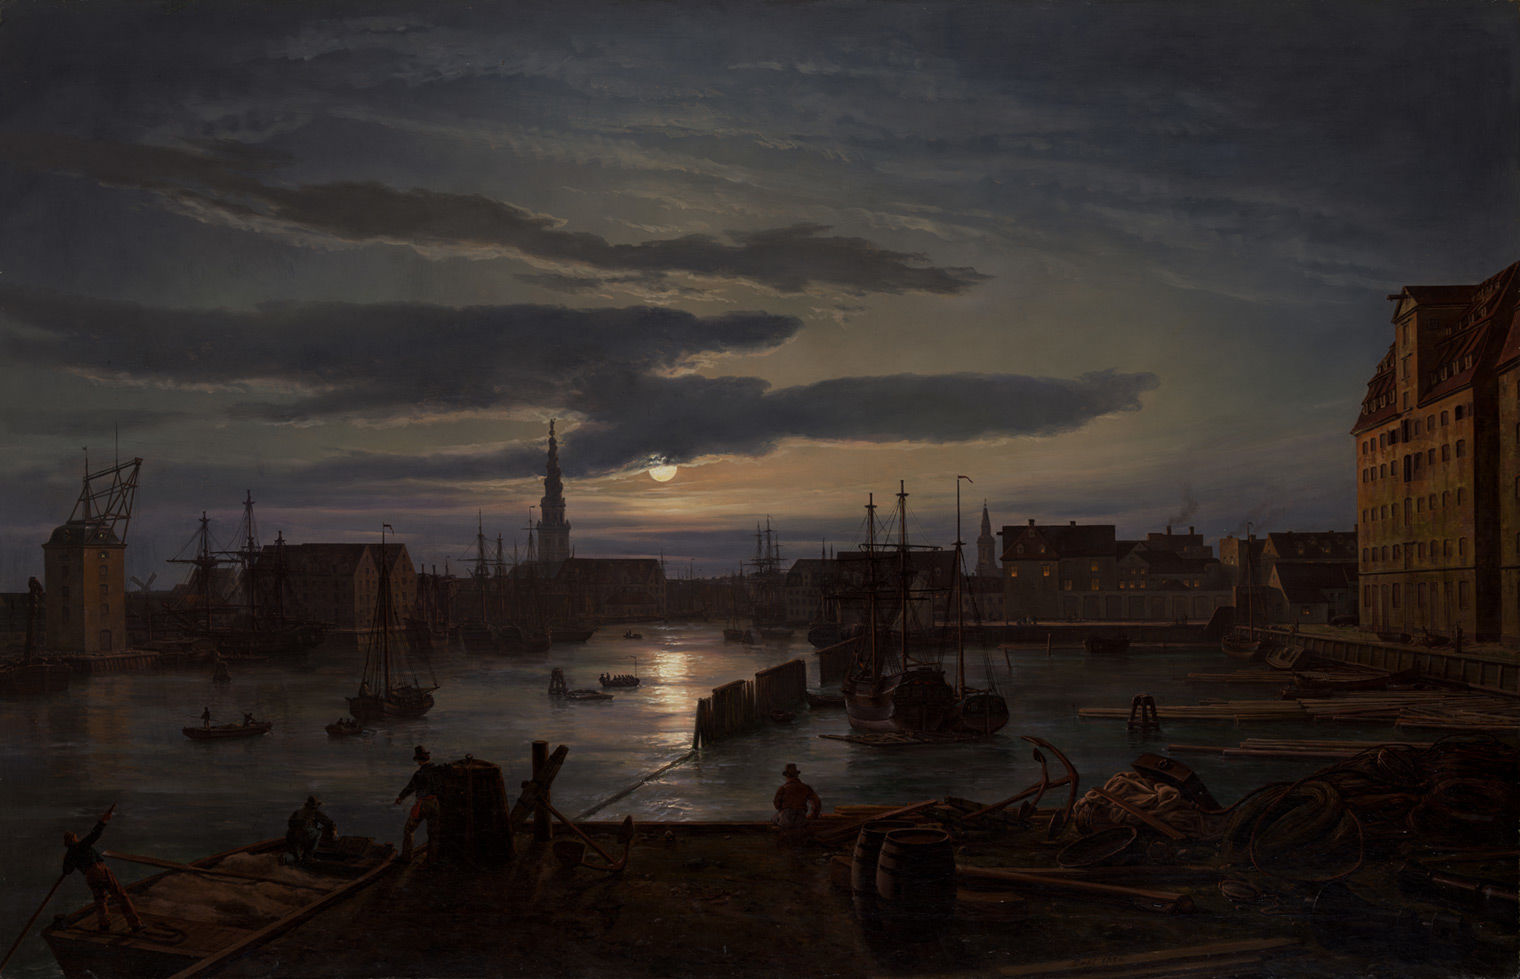 A painting of a moonlit view of a harbor with wooden boats being unloaded on docks